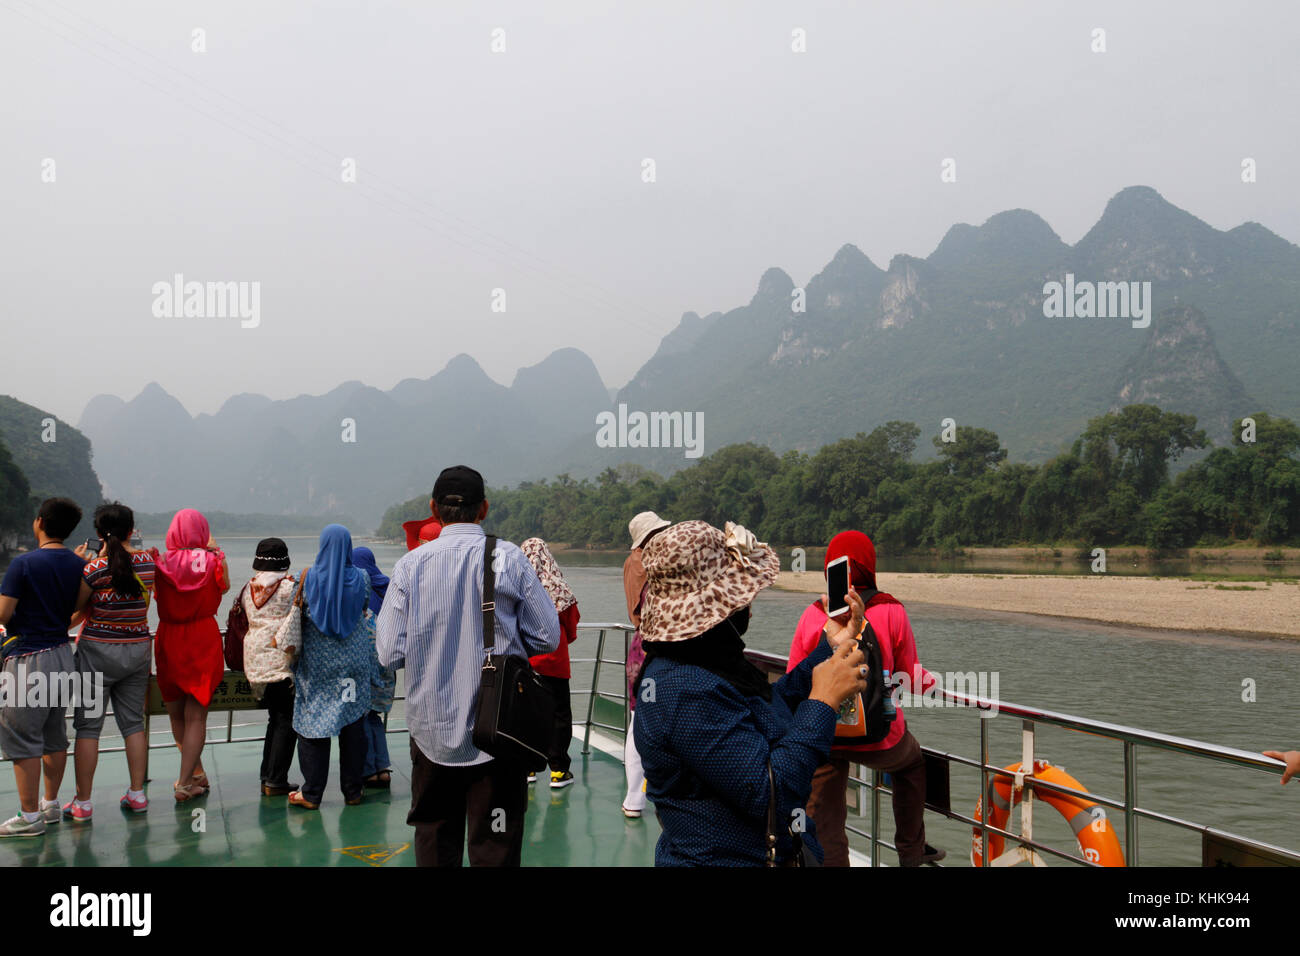 Tourists on a boat admiring the view in Guilin, China. Stock Photo